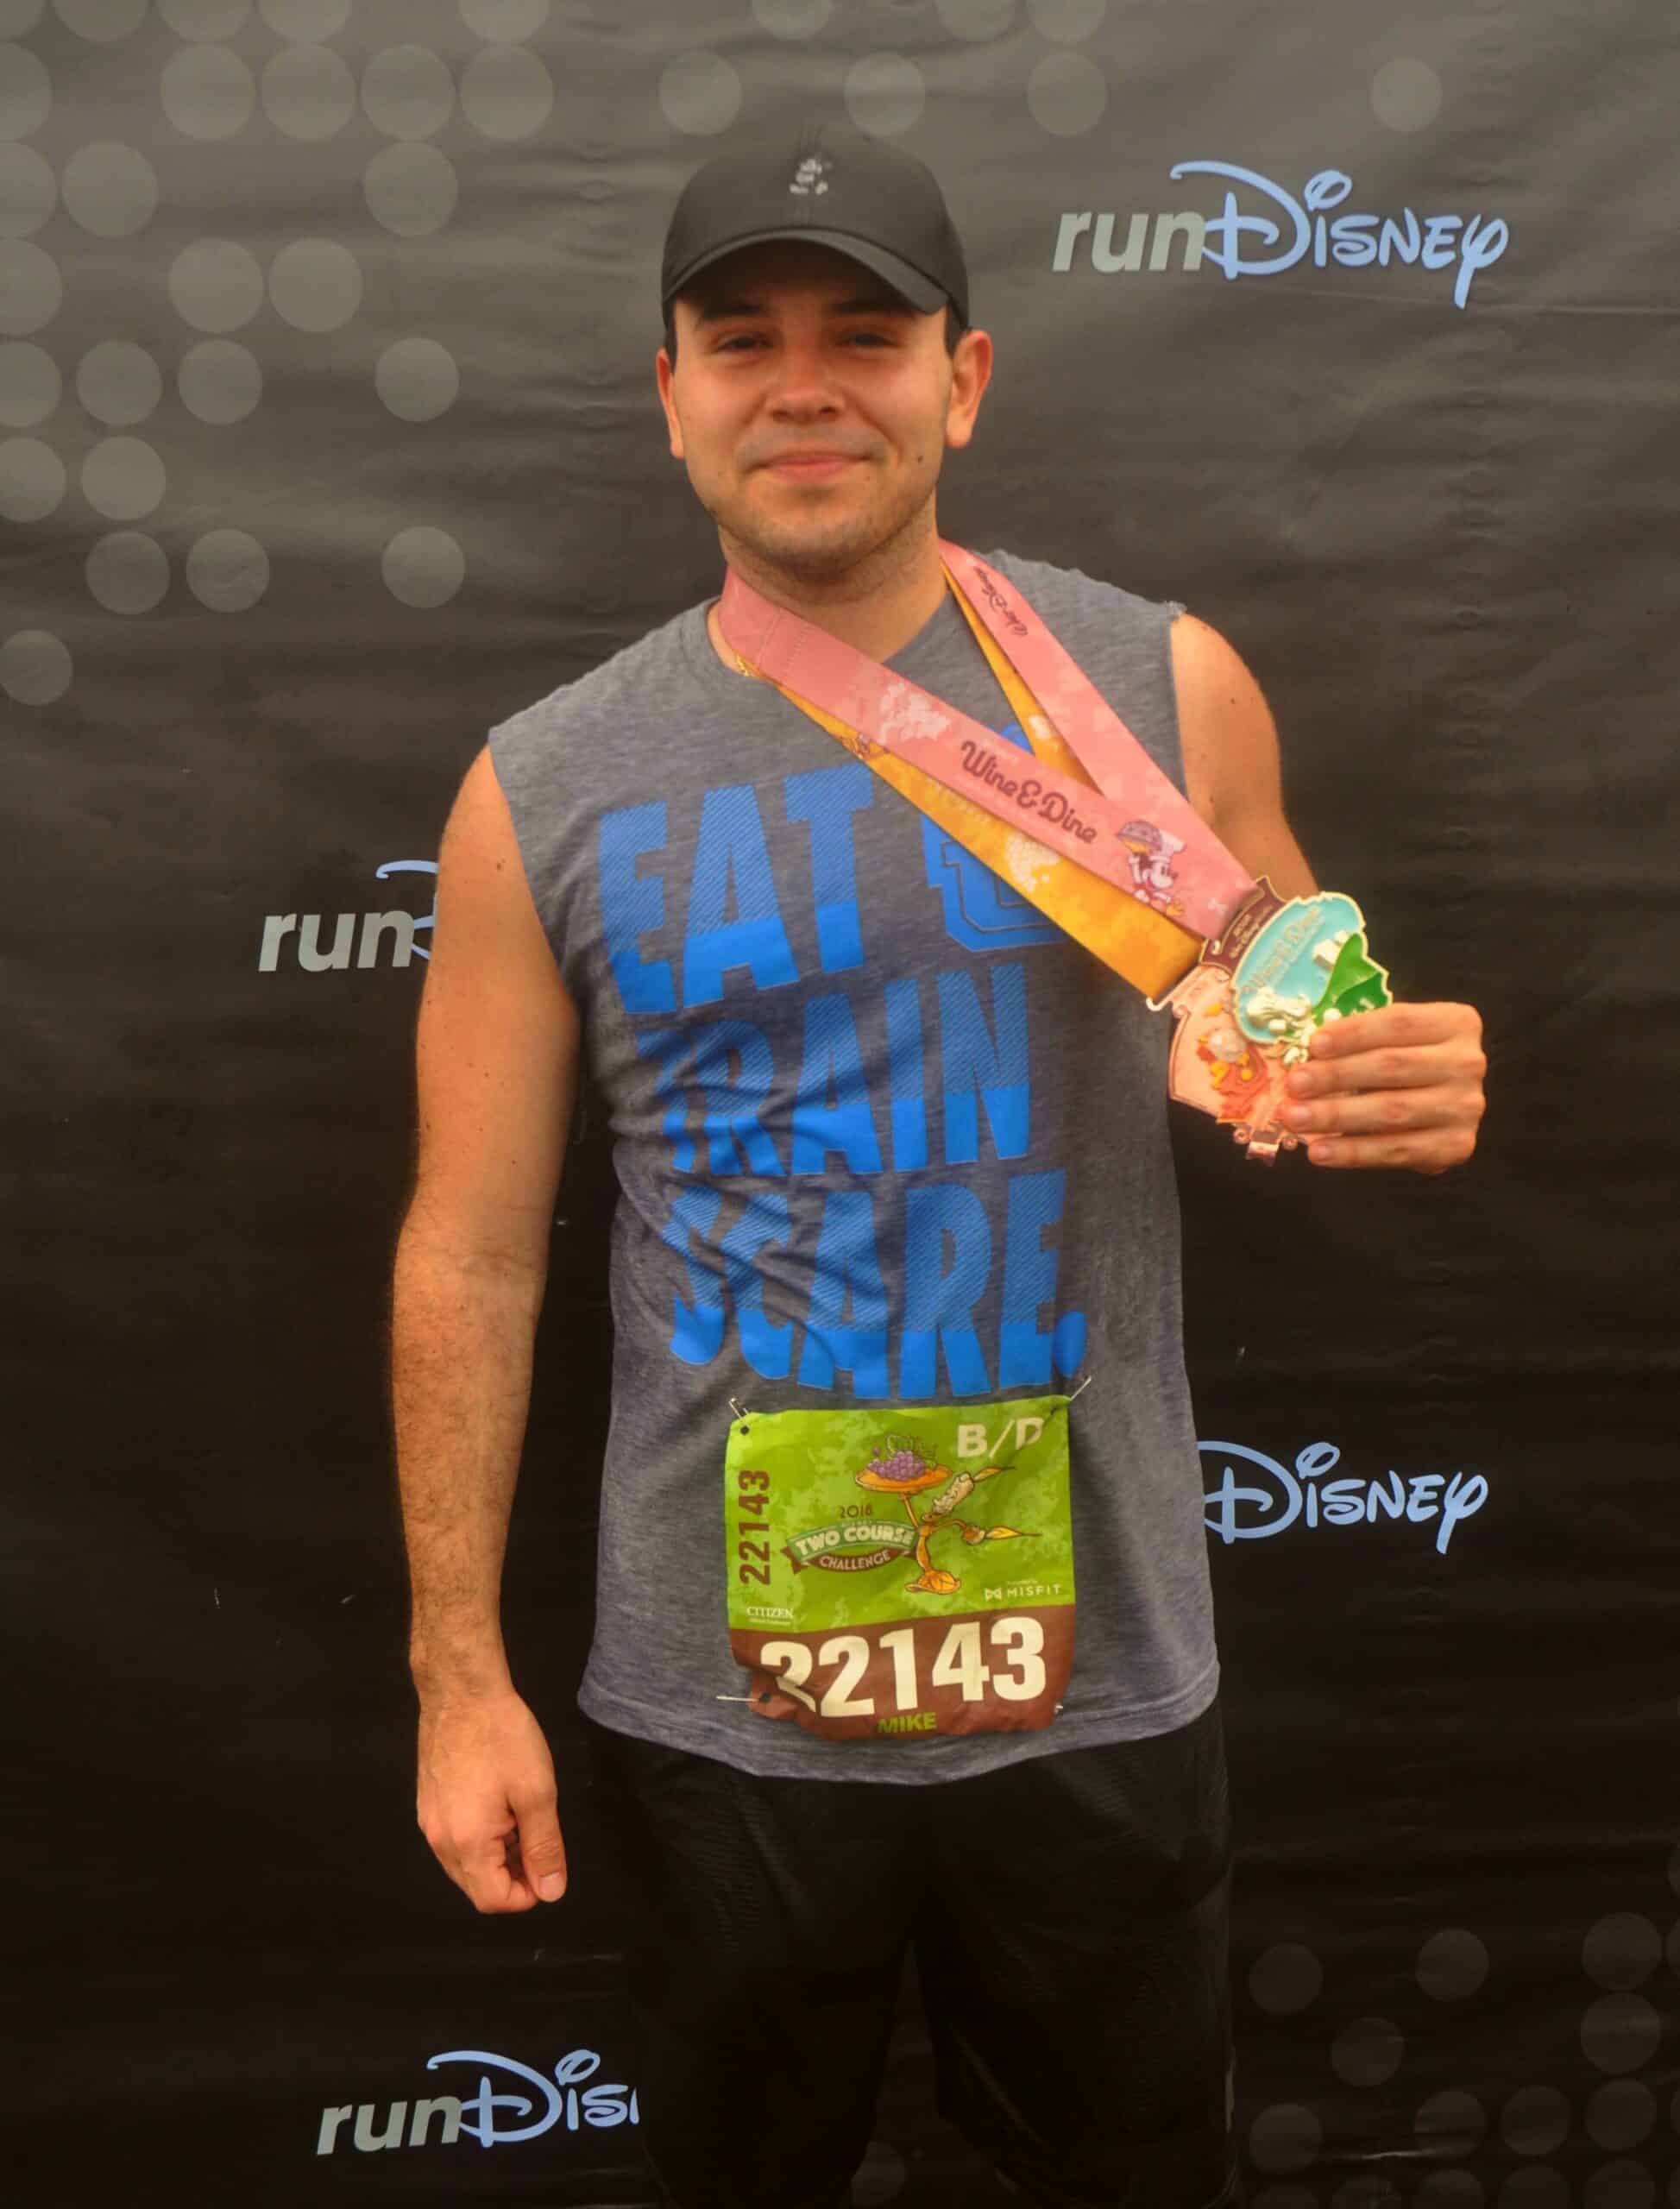 How to save money at theme parks - Michael Belmont with Disney Marathon medals